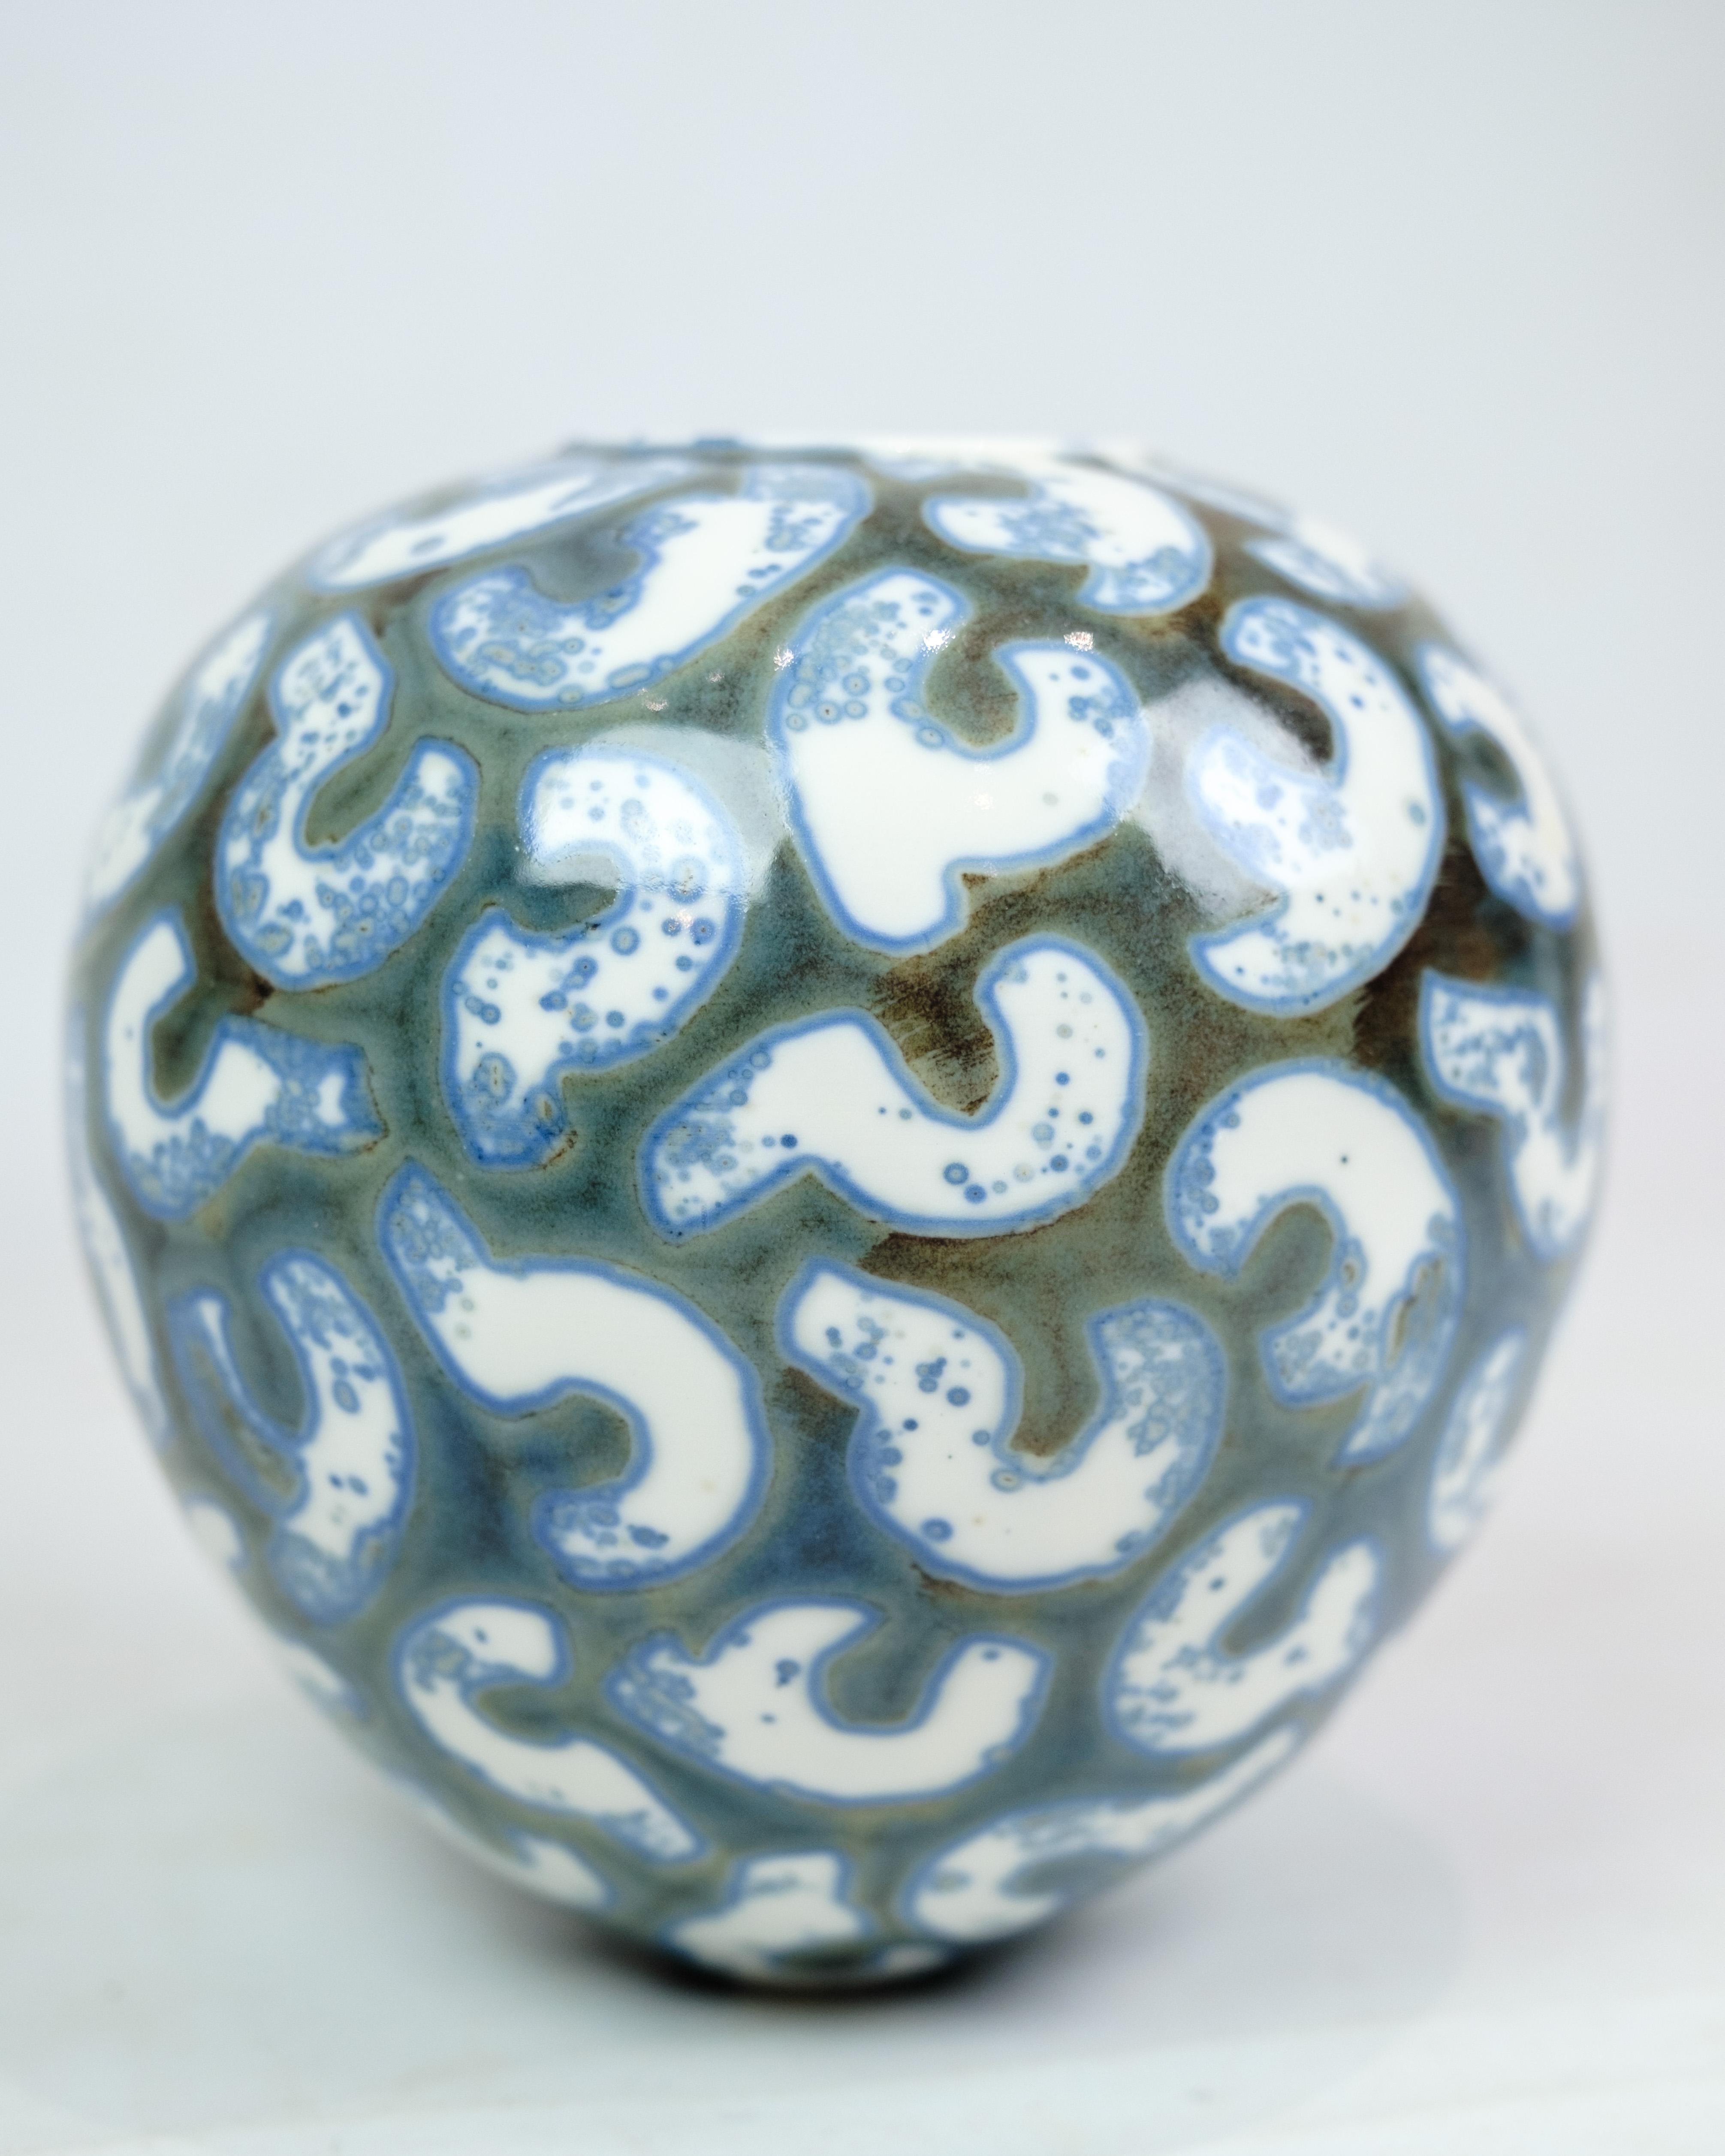 Ceramic Vase With Blue and White Patterned, Designed By Per Weiss From 1990s In Good Condition For Sale In Lejre, DK